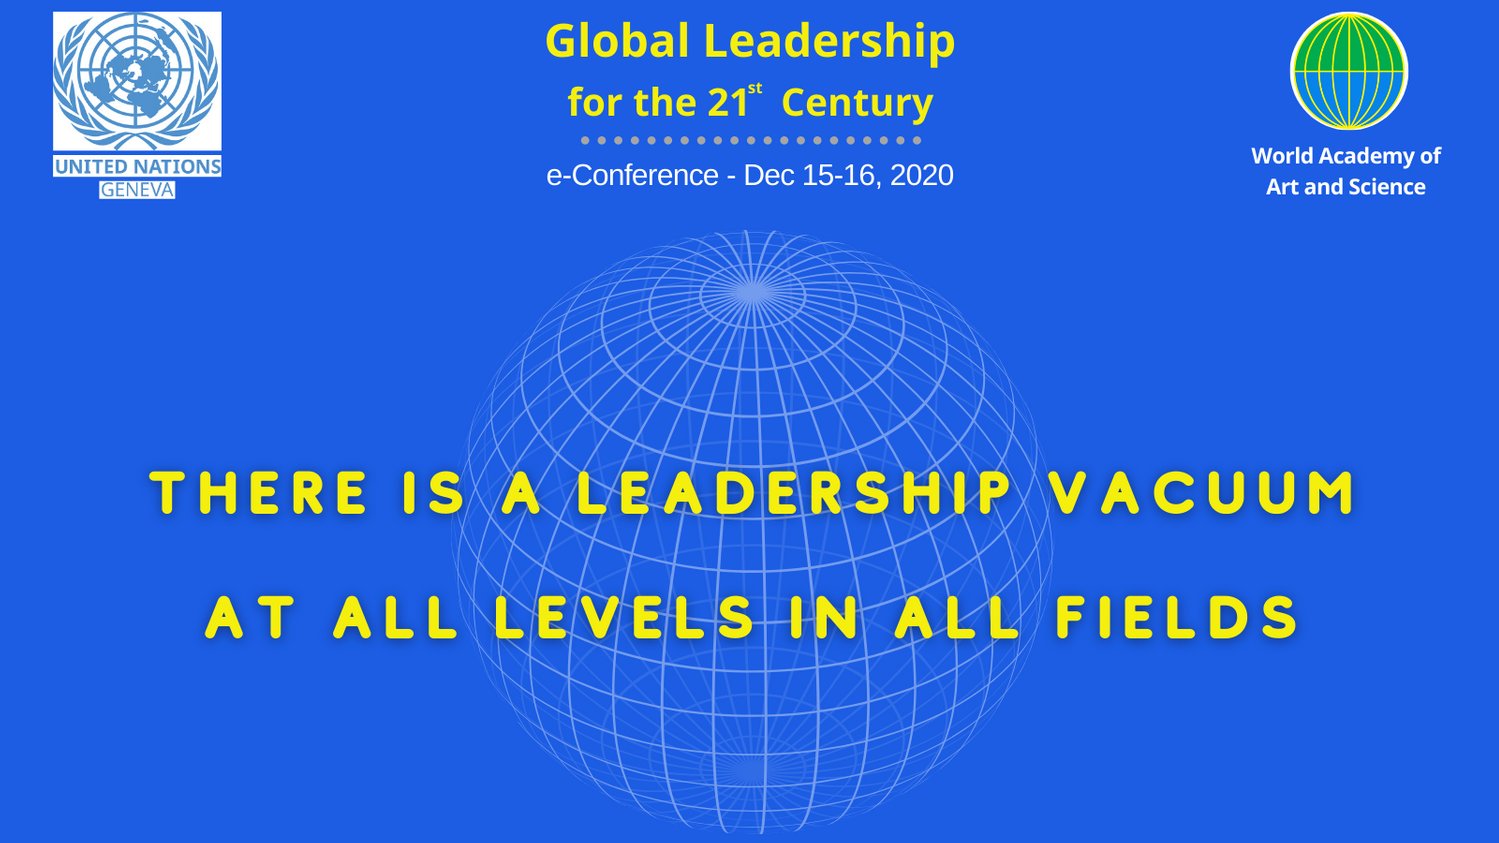 GLOBAL LEADERSHIP FOR THE 21ST CENTURY, a joint initiative of the United Nations Office at Geneva and the World Academy of Art & Science